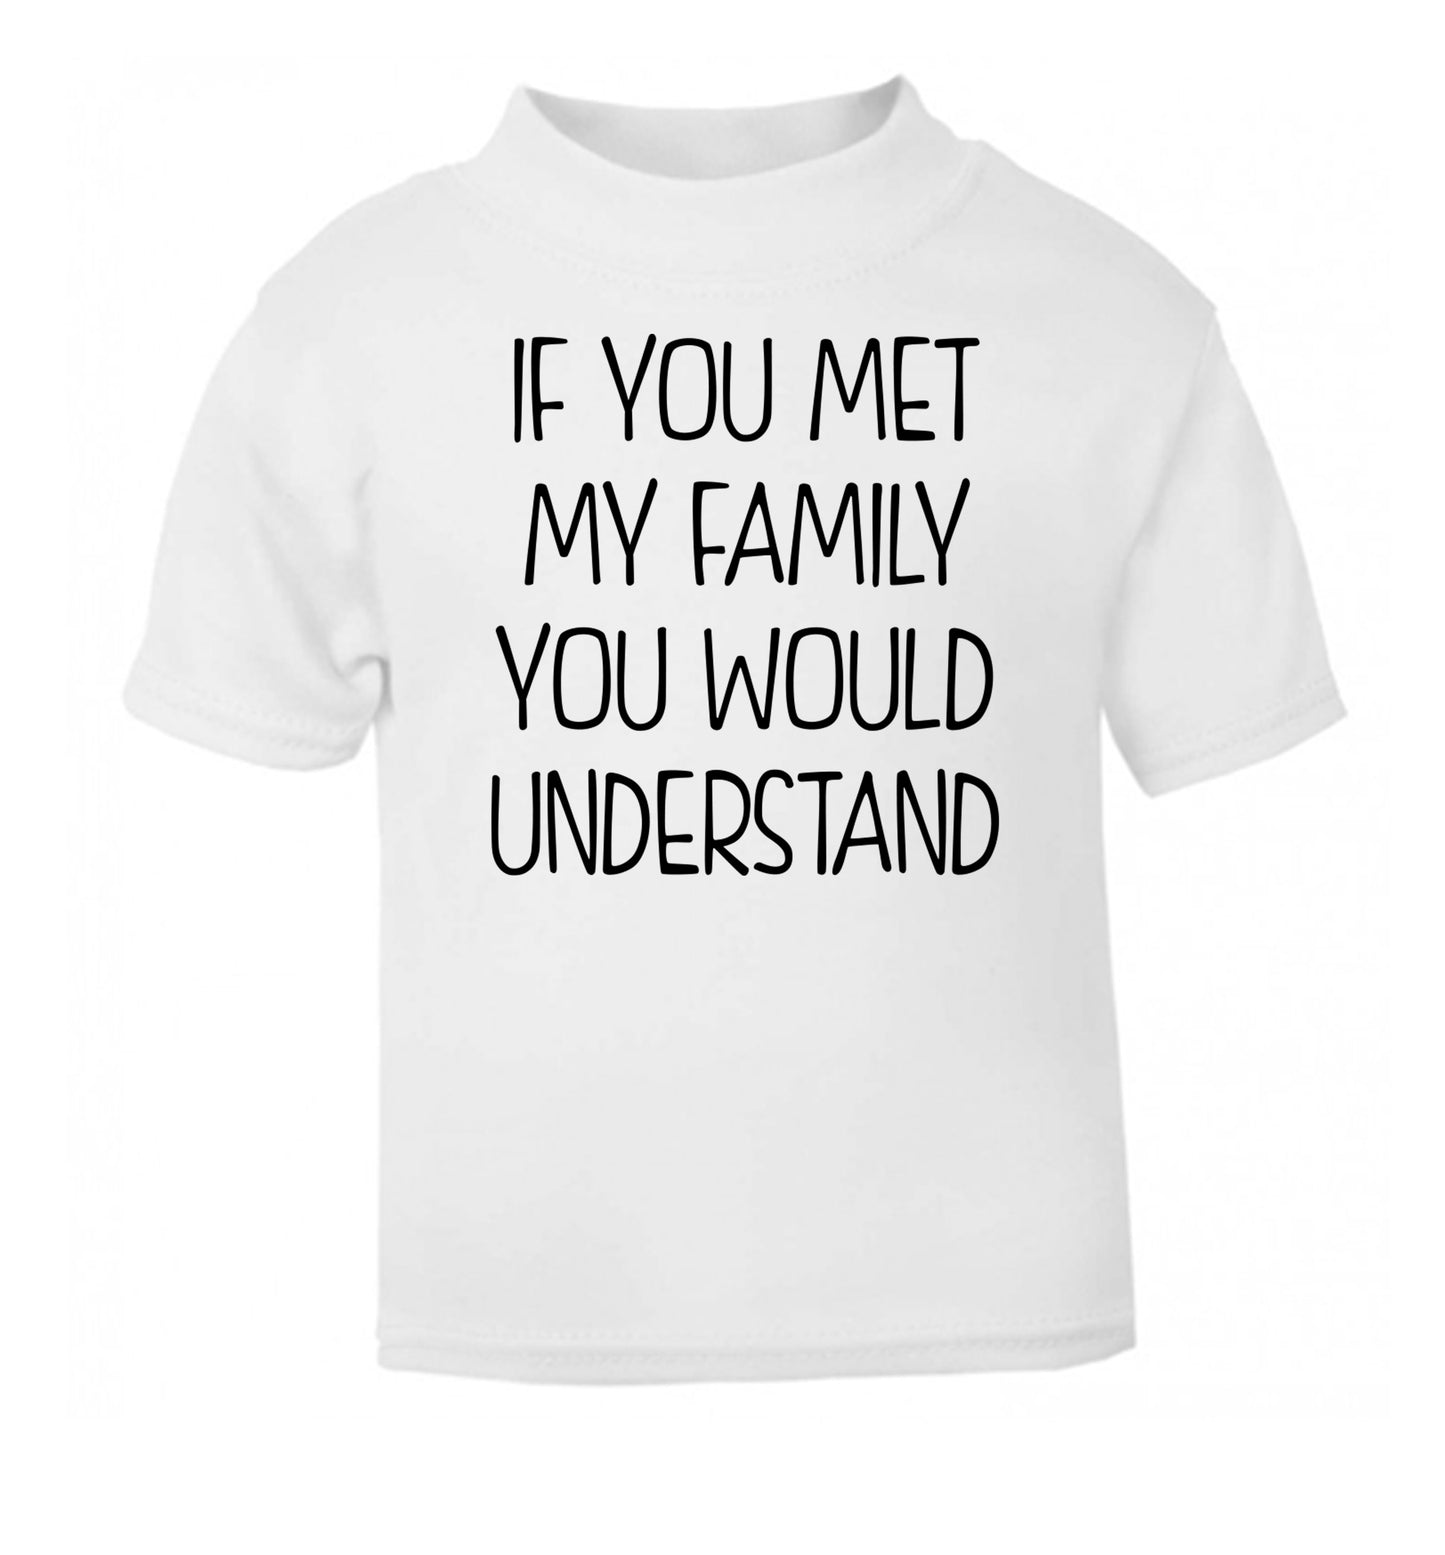 If you met my family you would understand white Baby Toddler Tshirt 2 Years